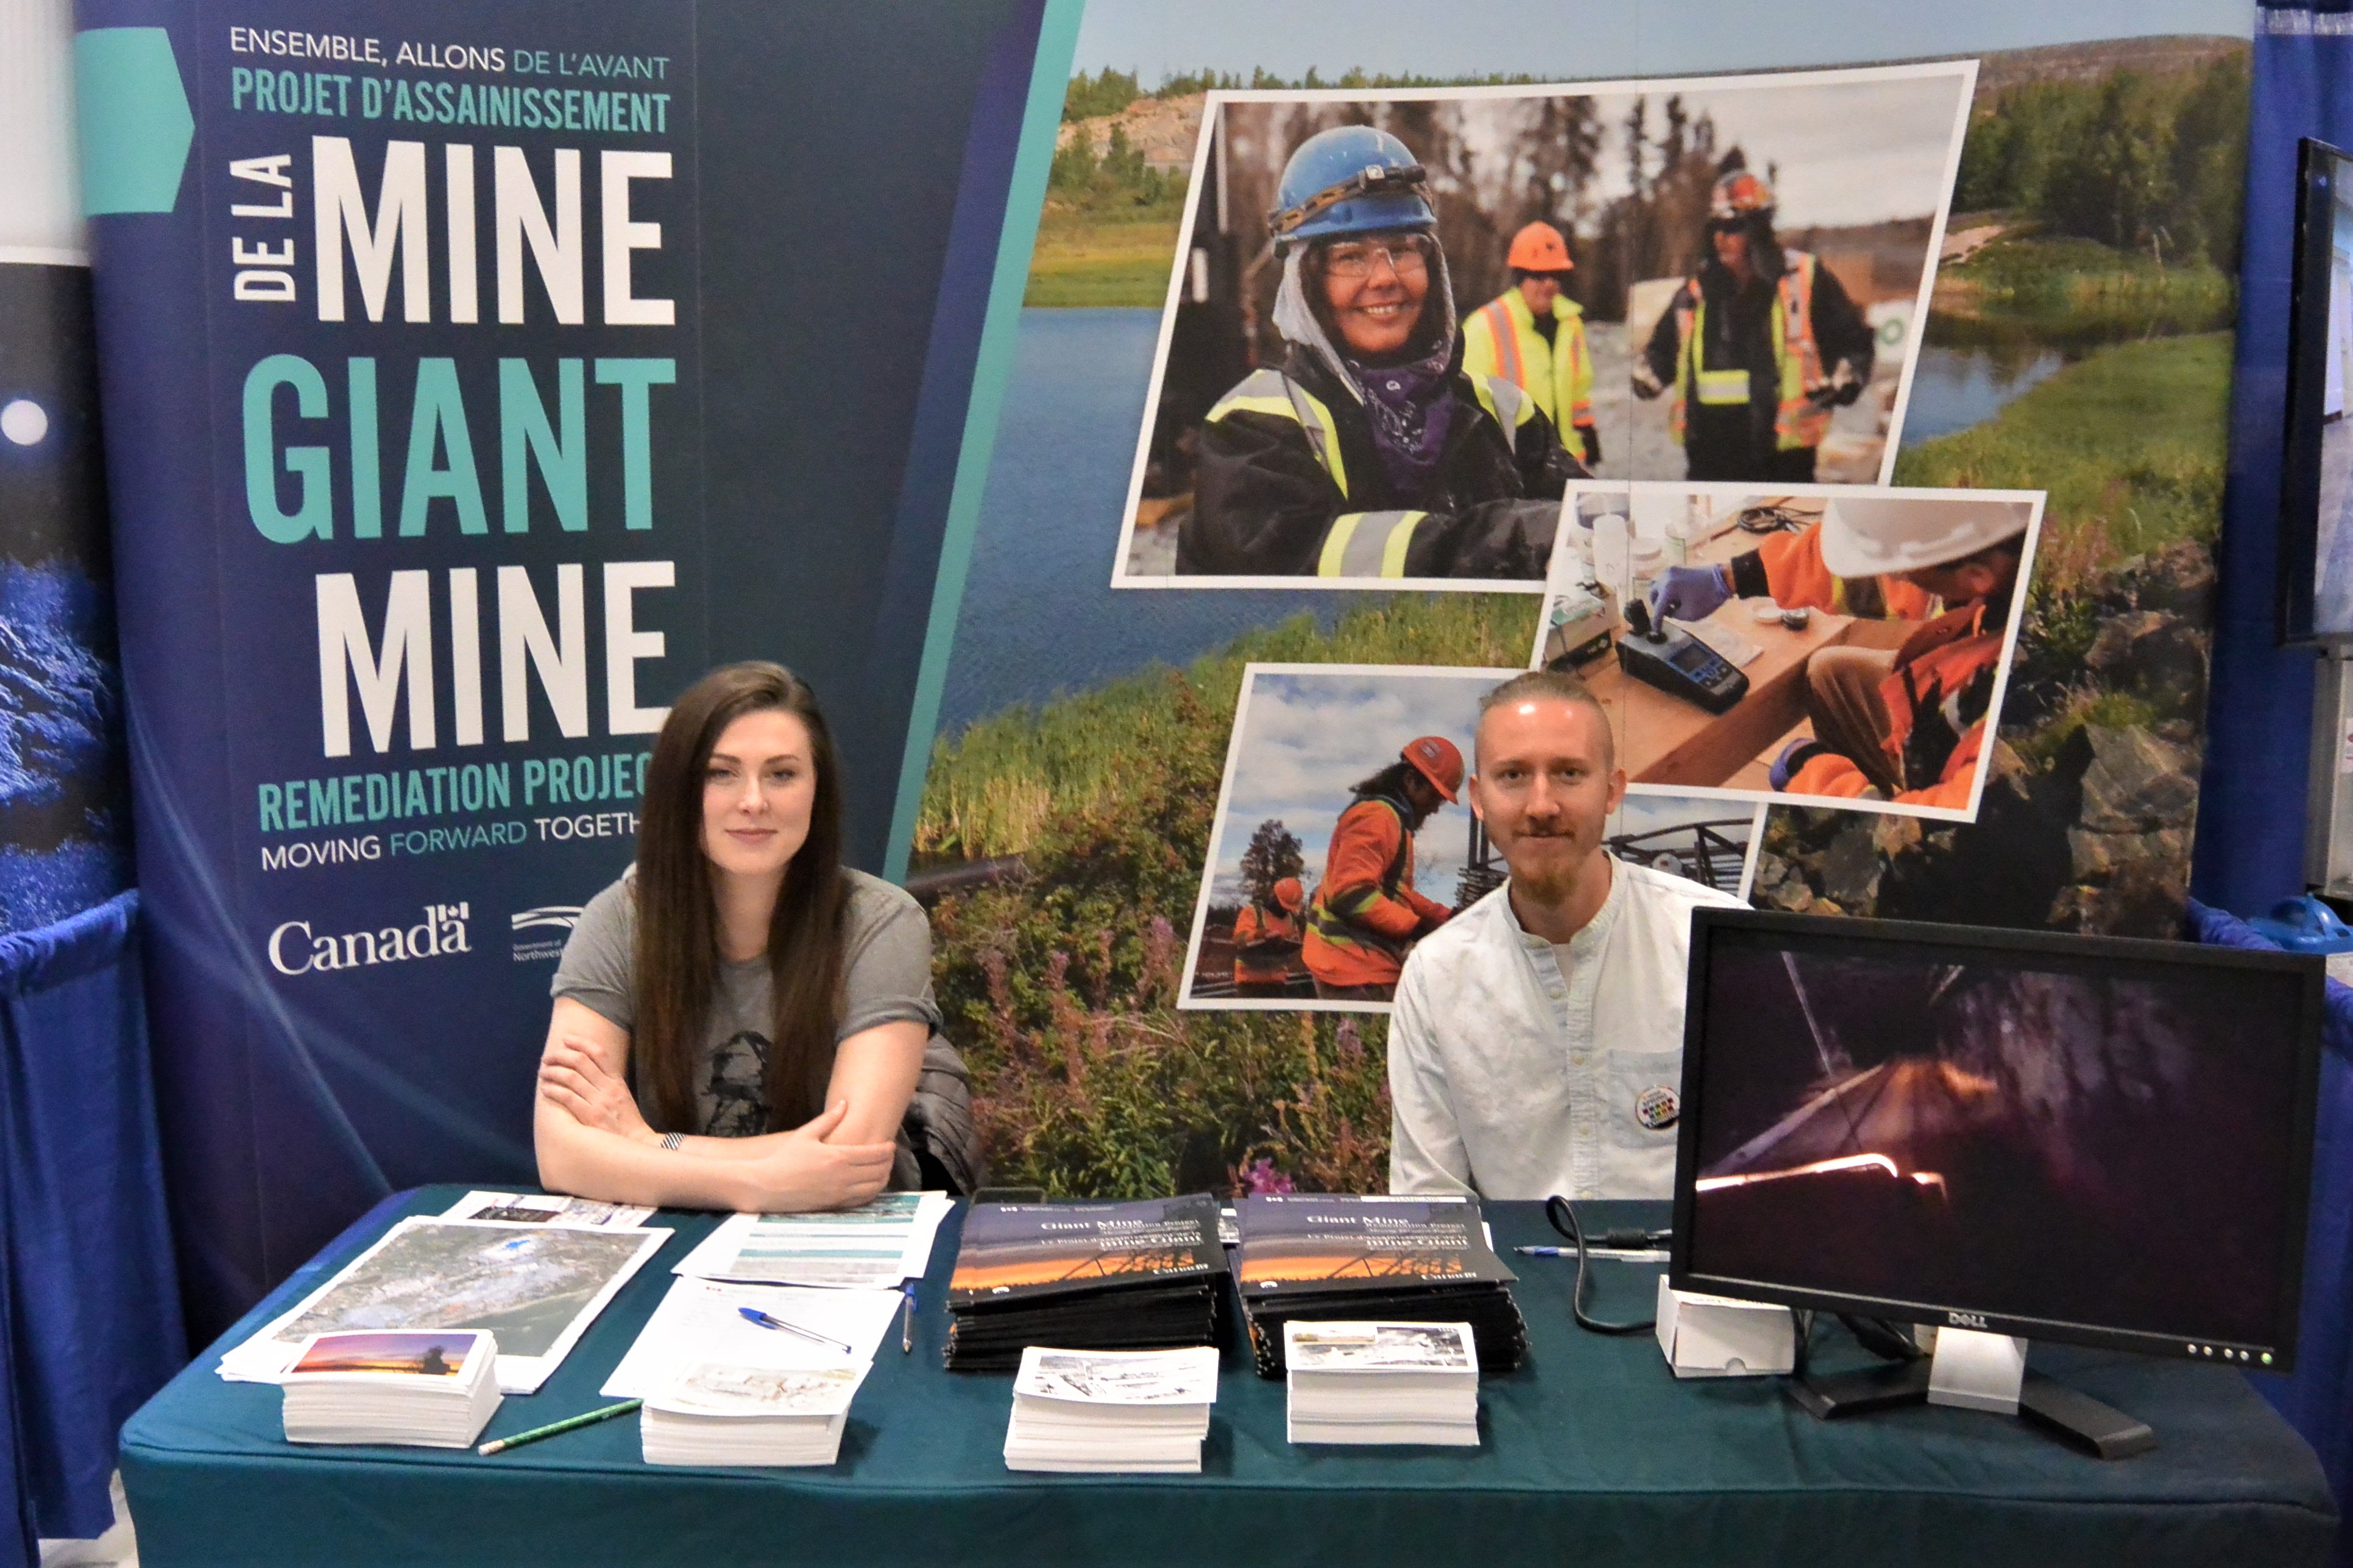 This pictures shows a woman and a man seated at a tradeshow booth table, with their Giant Mine Remediation Project backdrop behind them